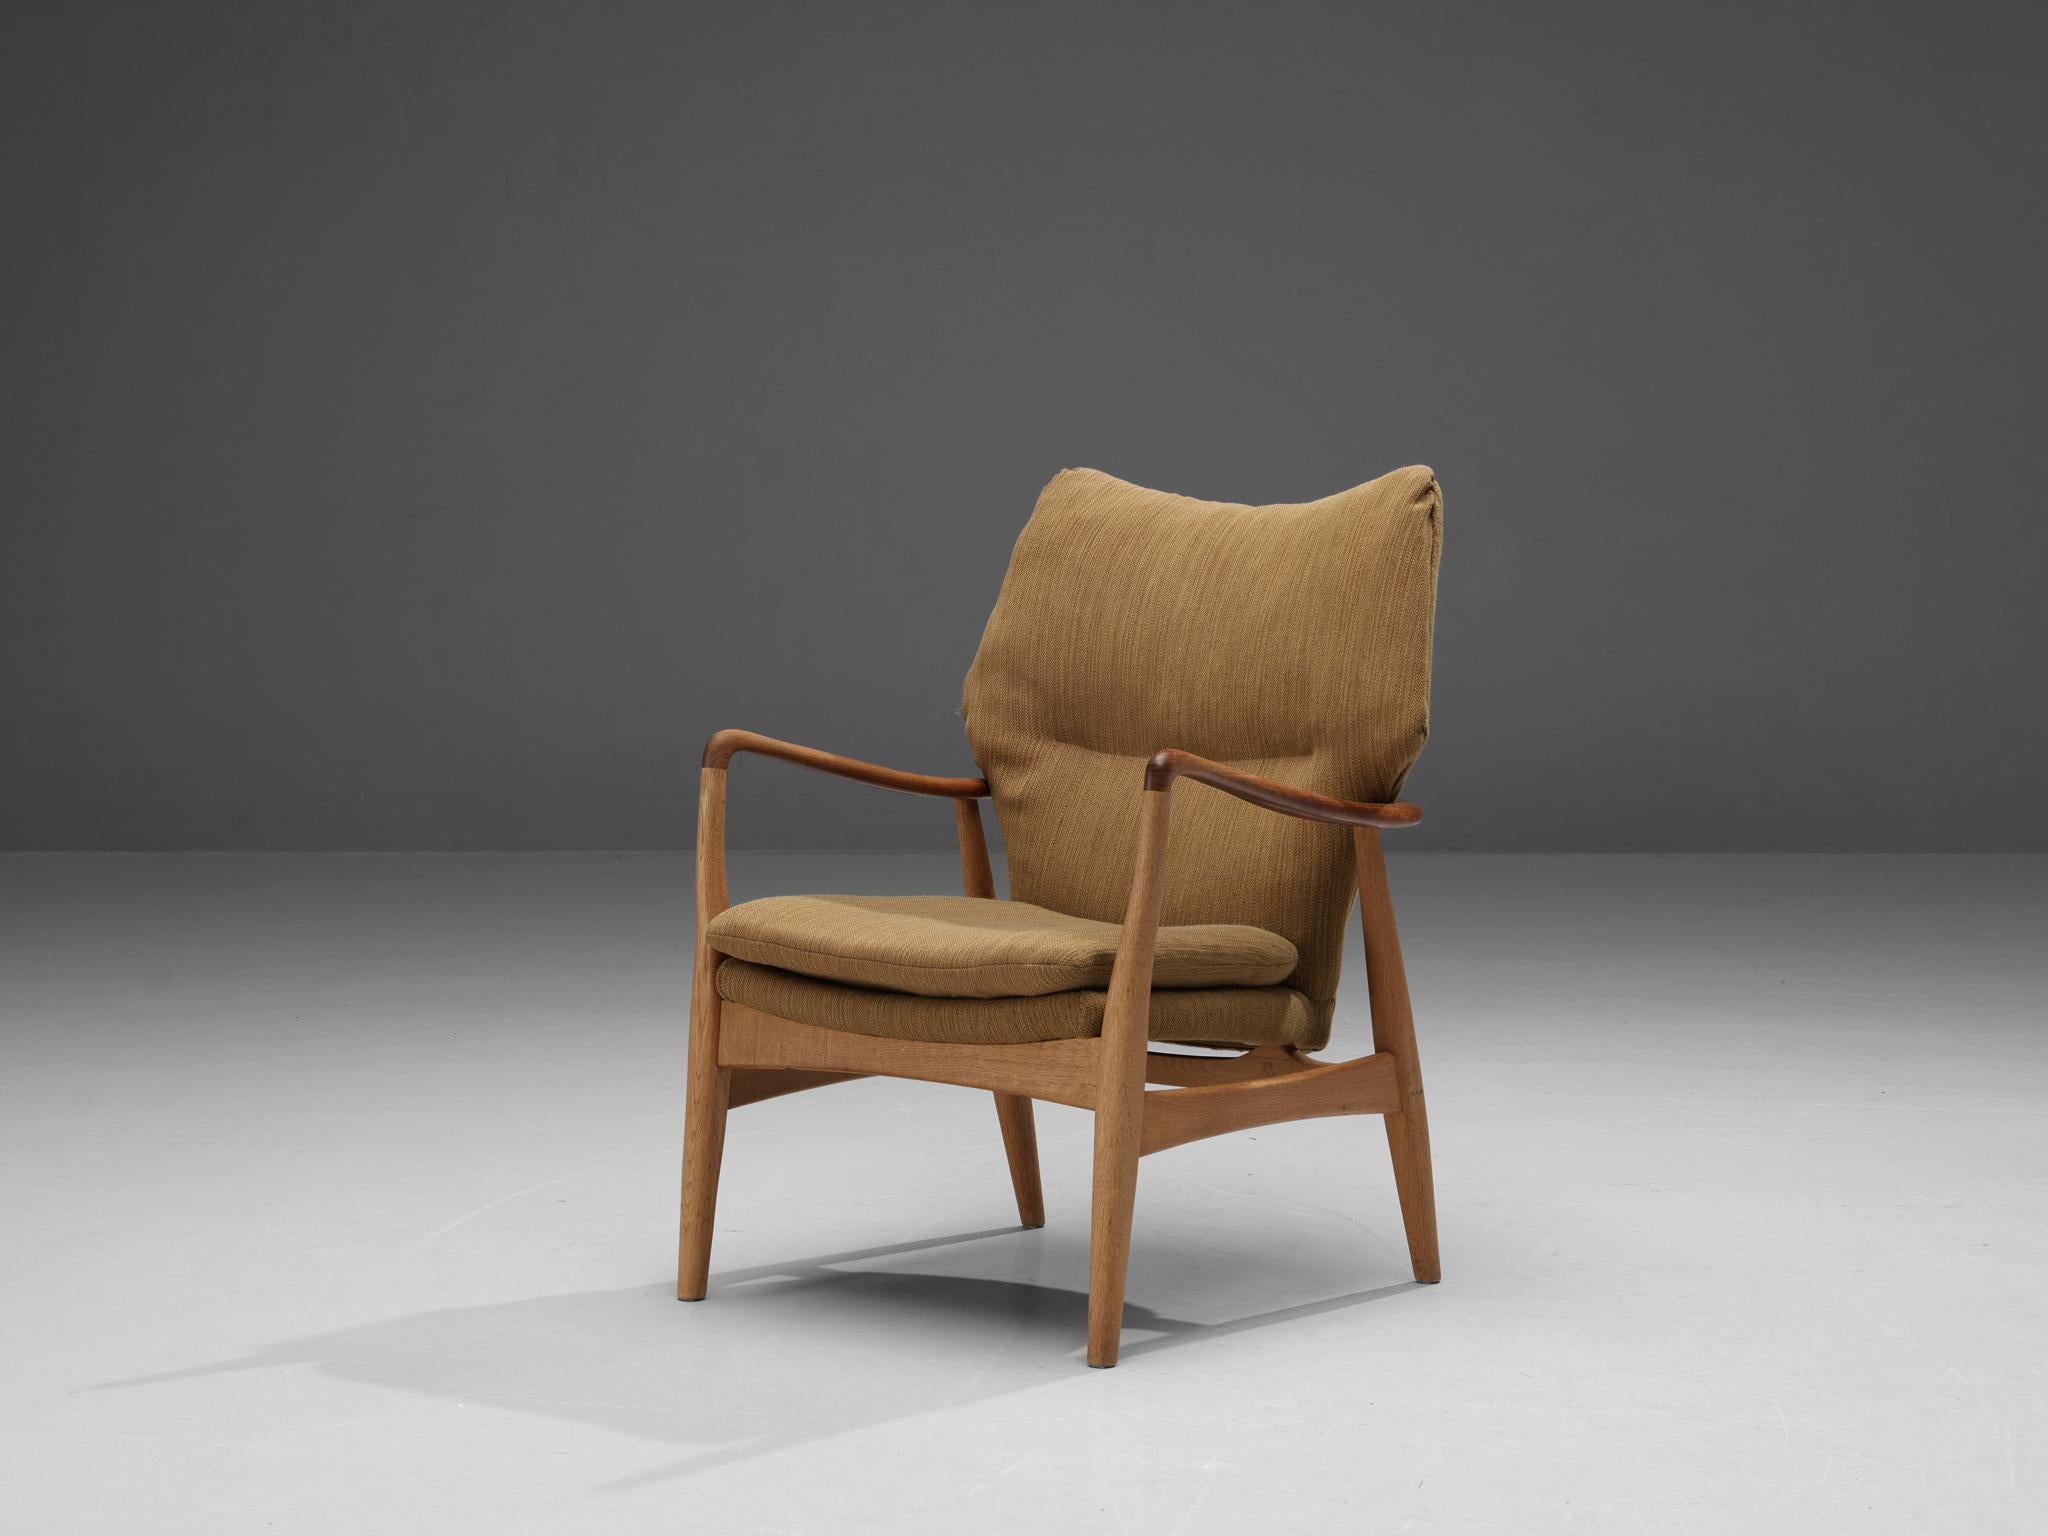 Aksel Bender Madsen for Bovenkamp, lounge chair, teak and oak, fabric, Denmark, 1950s.

Madsen is known for his modest, minimalist designs. This lounge chair has armrests made out of teak while the rest of the frame is oak. The frame has a